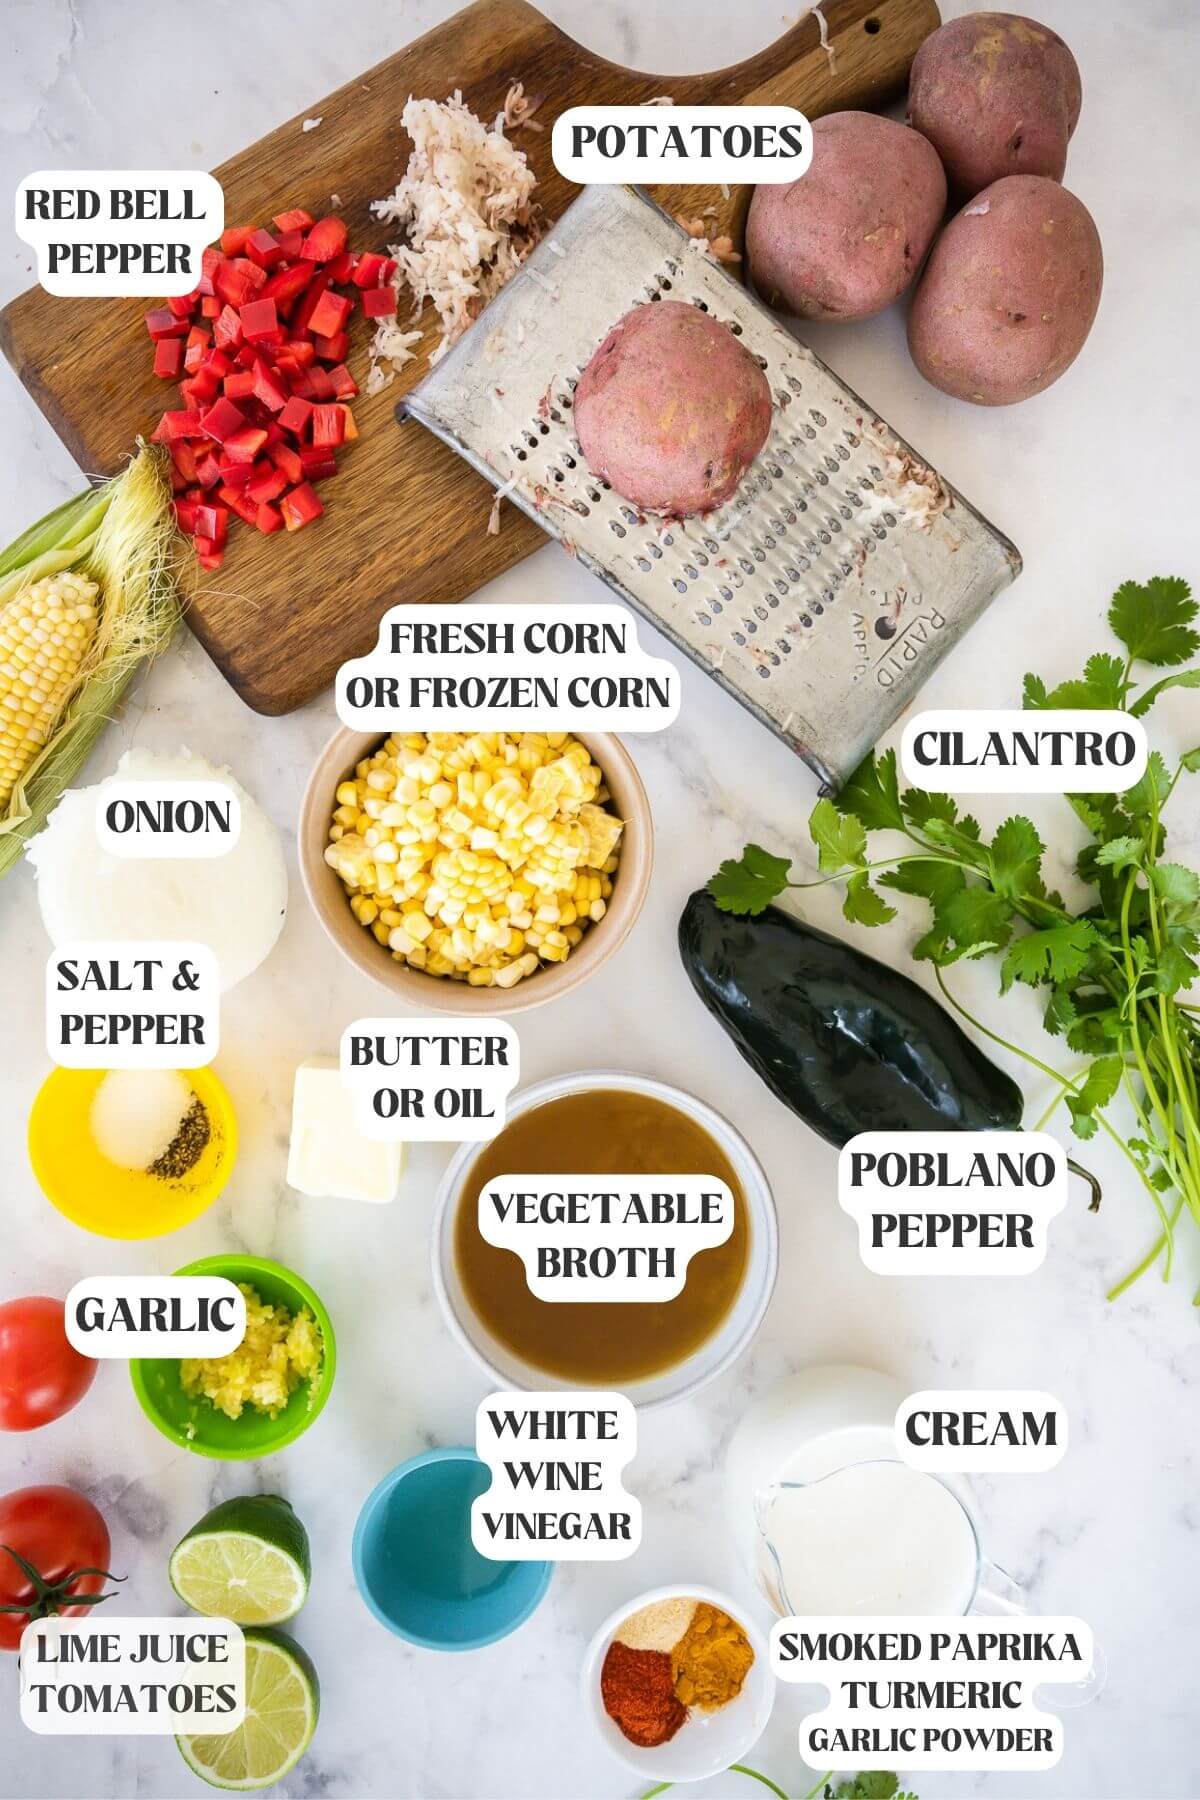 Labeled Ingredients for Panera Bread Summer Corn Chowder.